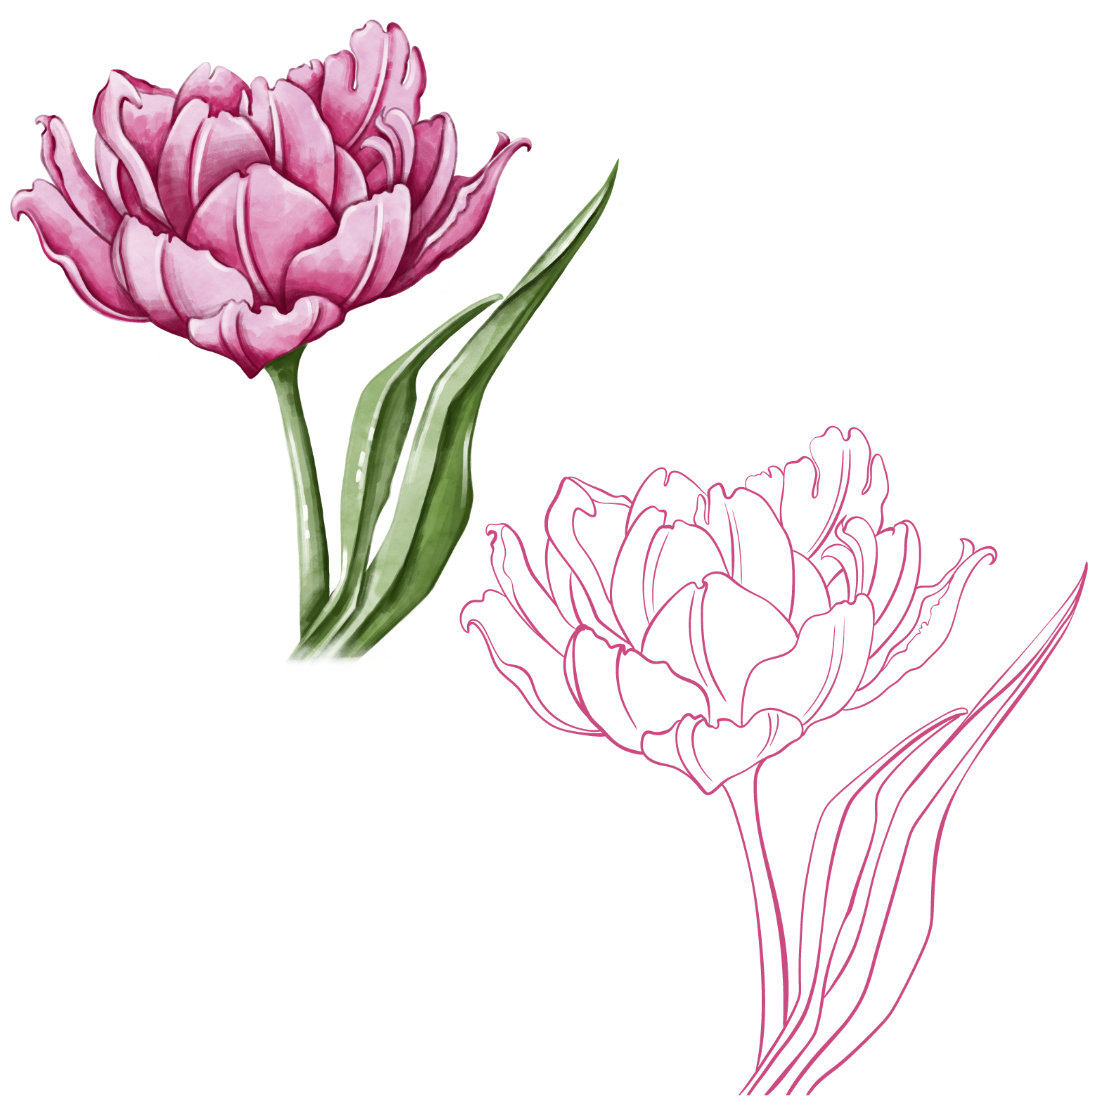 Drawing of a pink flower and a green stem.